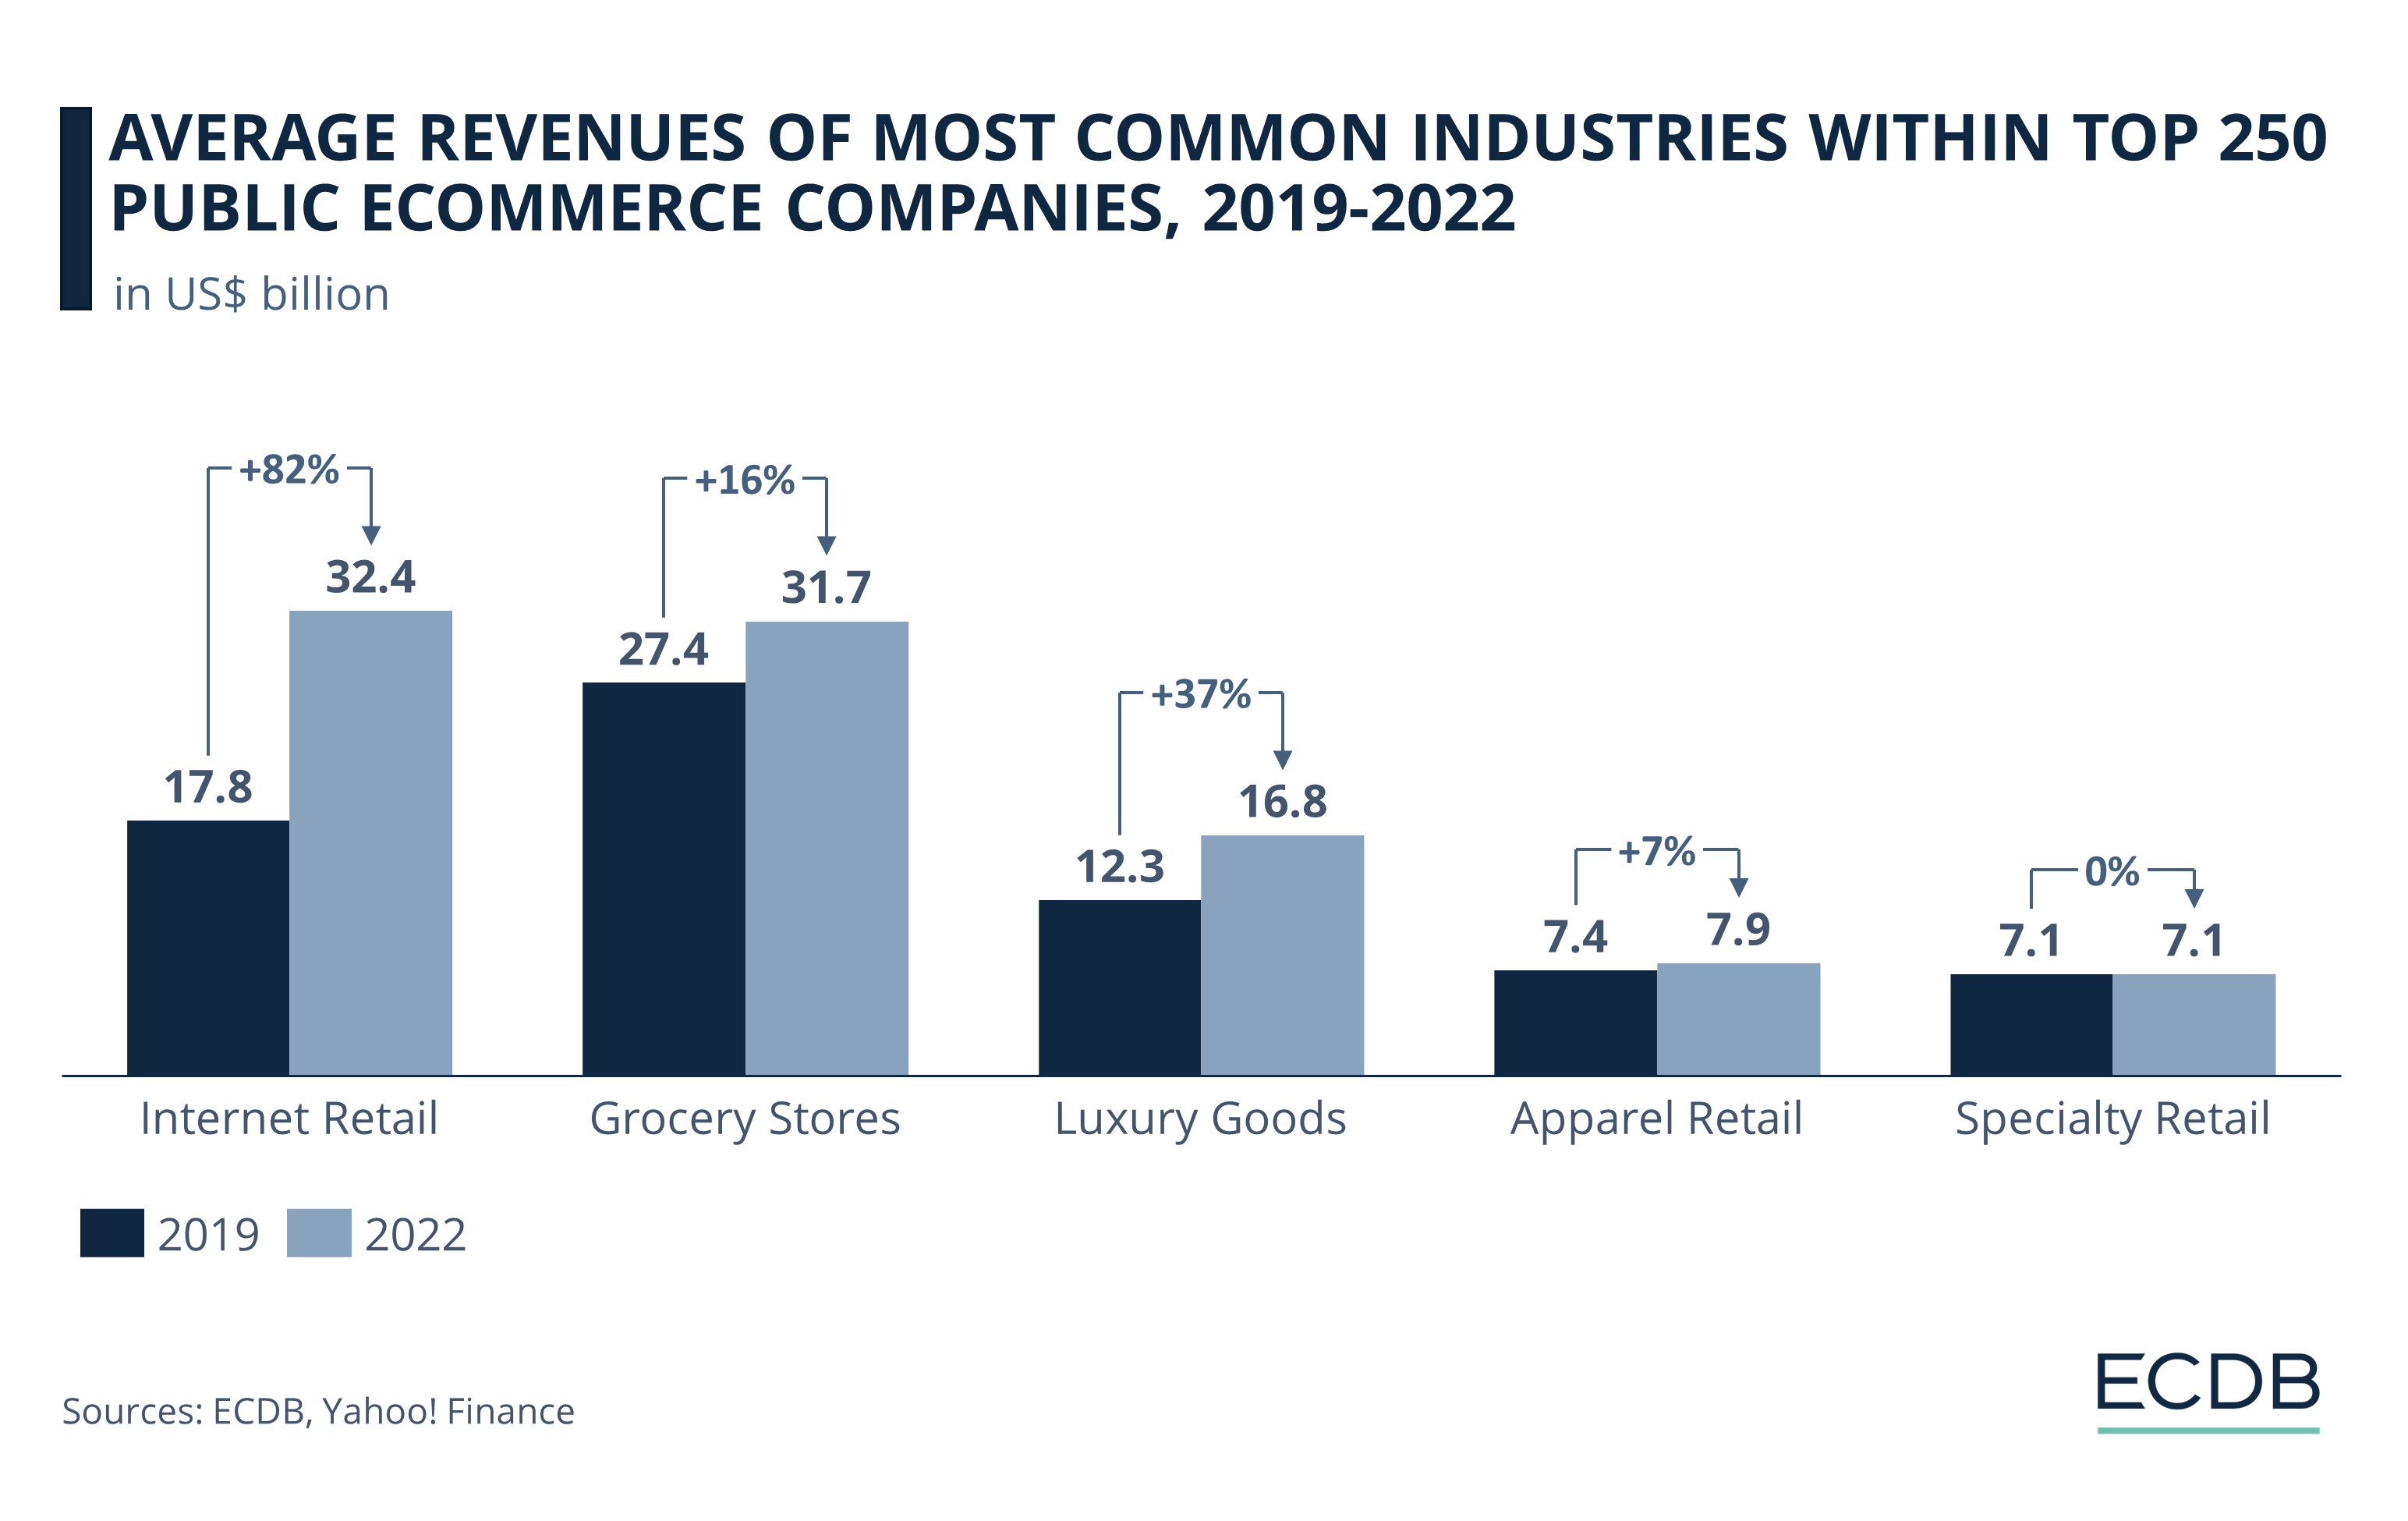 Average Revenues of Most Common Industries Within Top 250 Public eCommerce Companies, 2019-2022